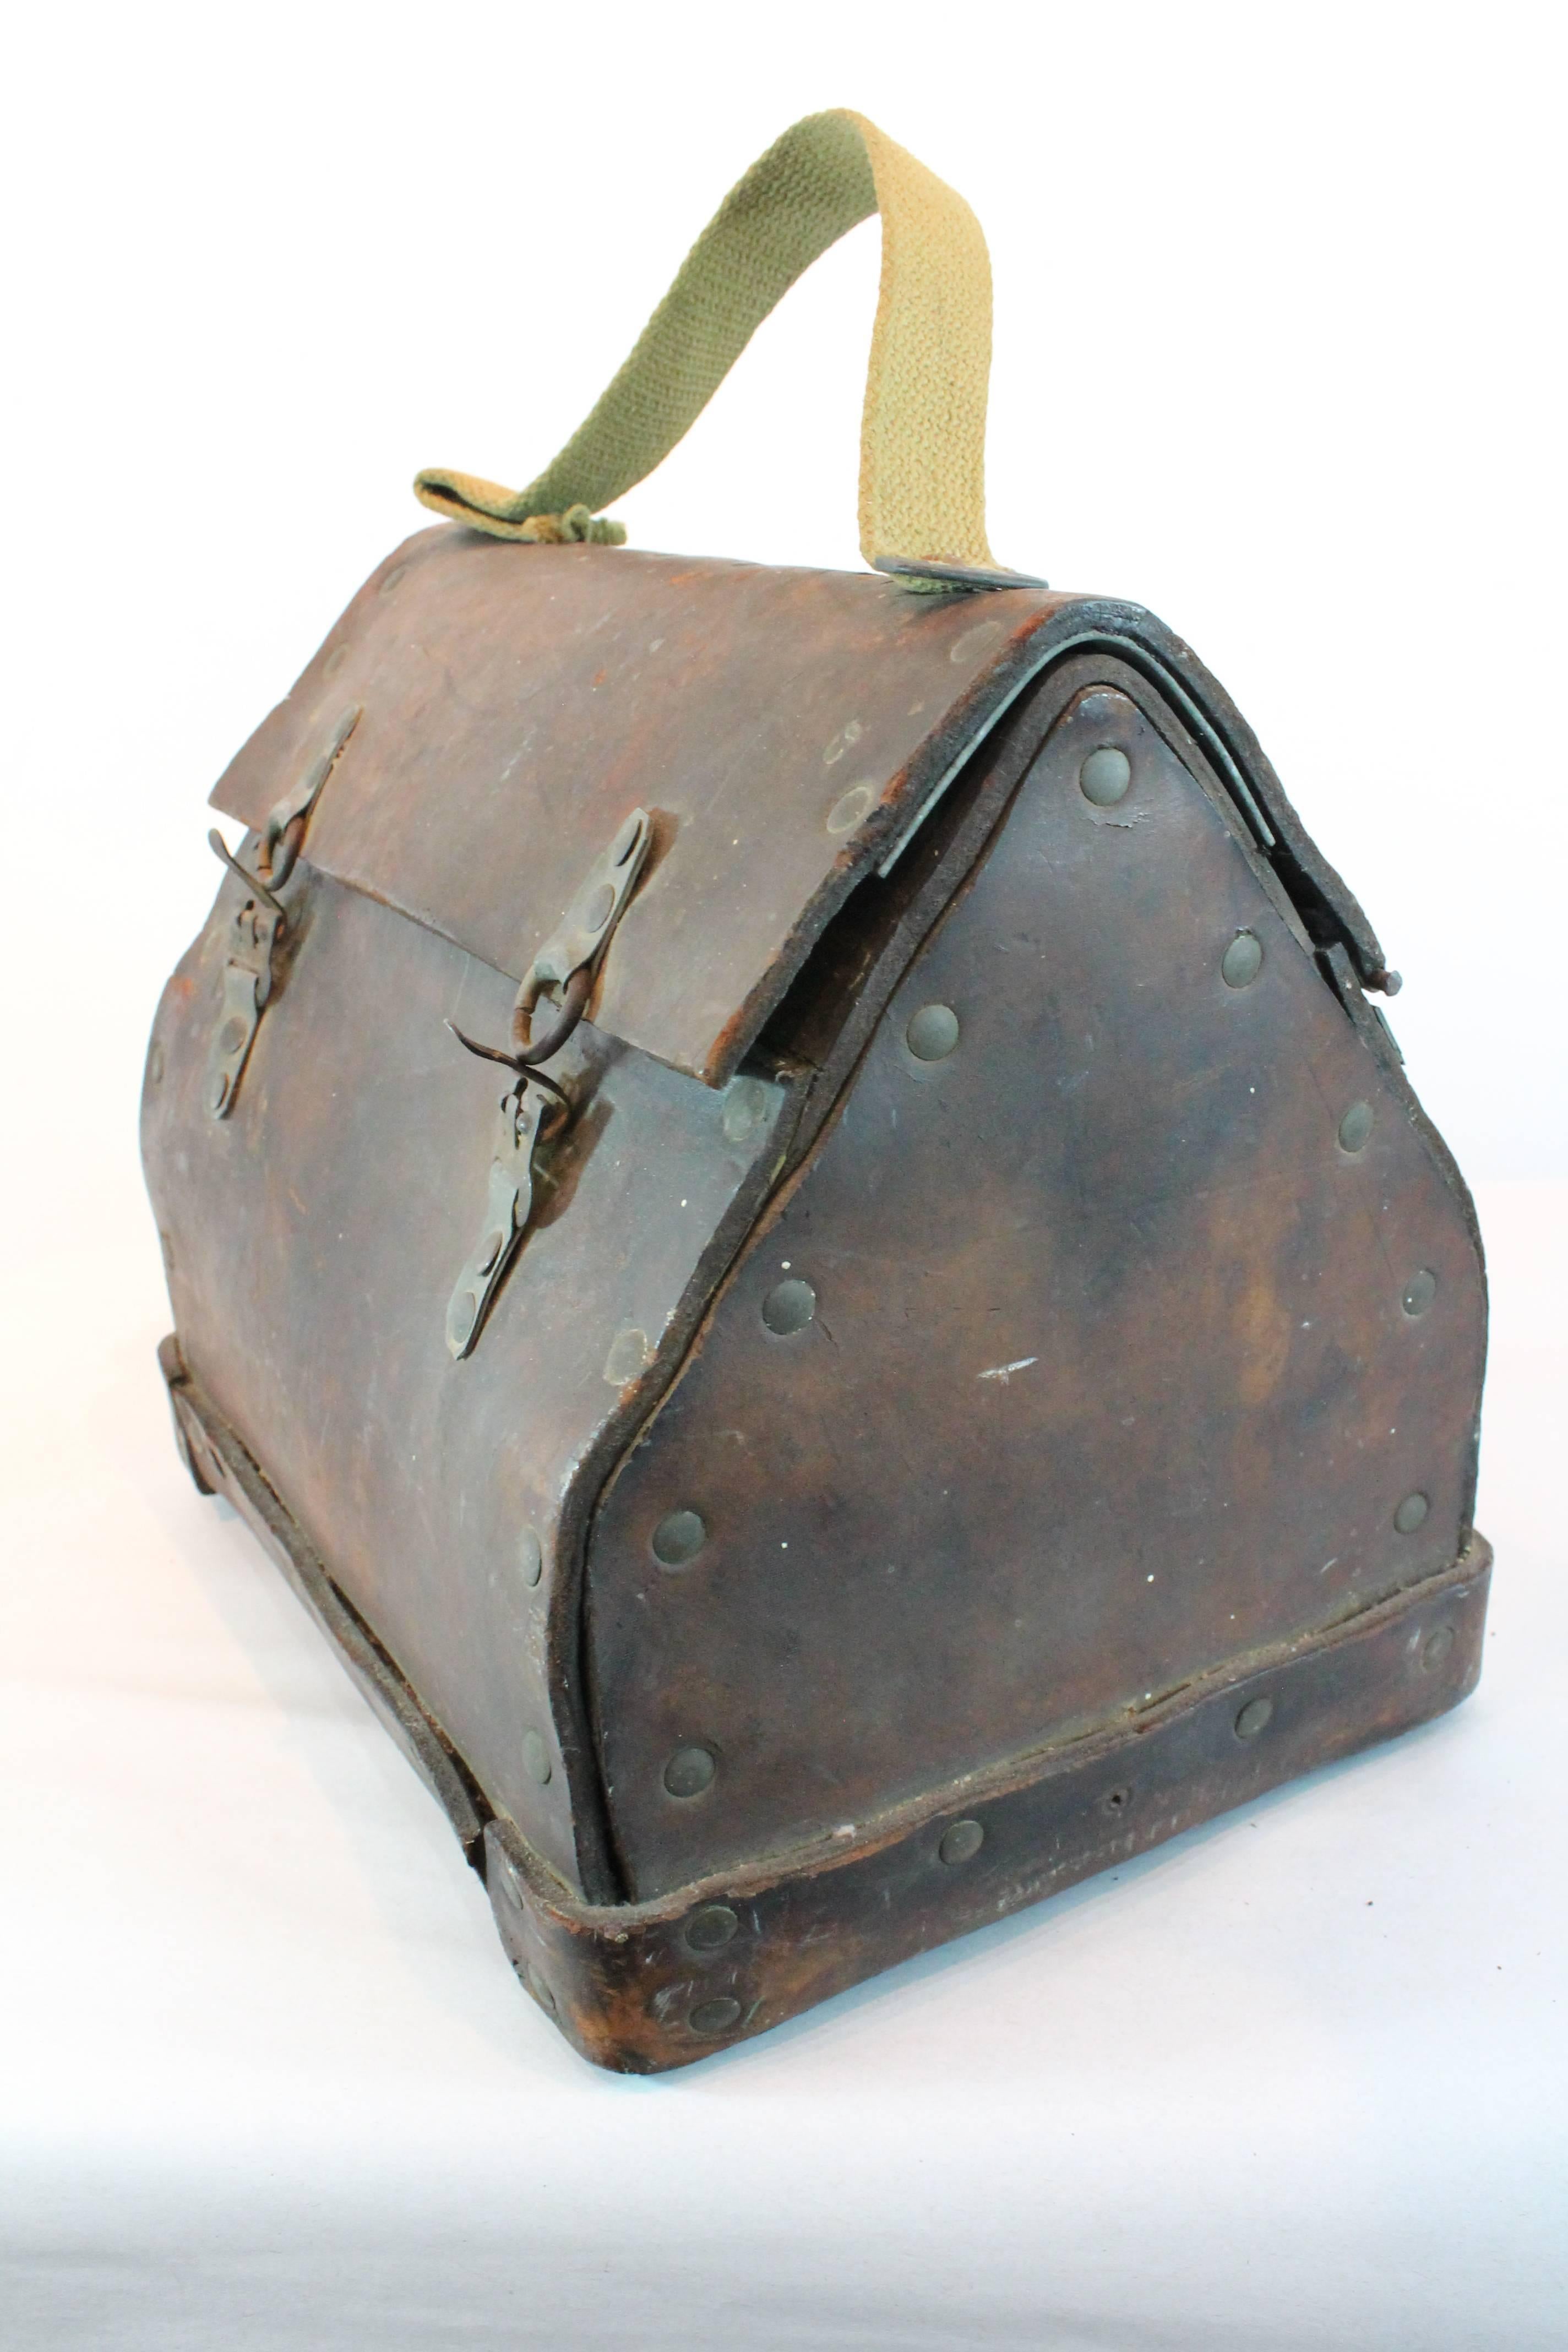 Wonderful primitive construction on this Folk Art handmade thick leather lunch box.
Tremendous patina and surface.
We are not certain if the original handle was also leather and the current handle replaced it long ago.